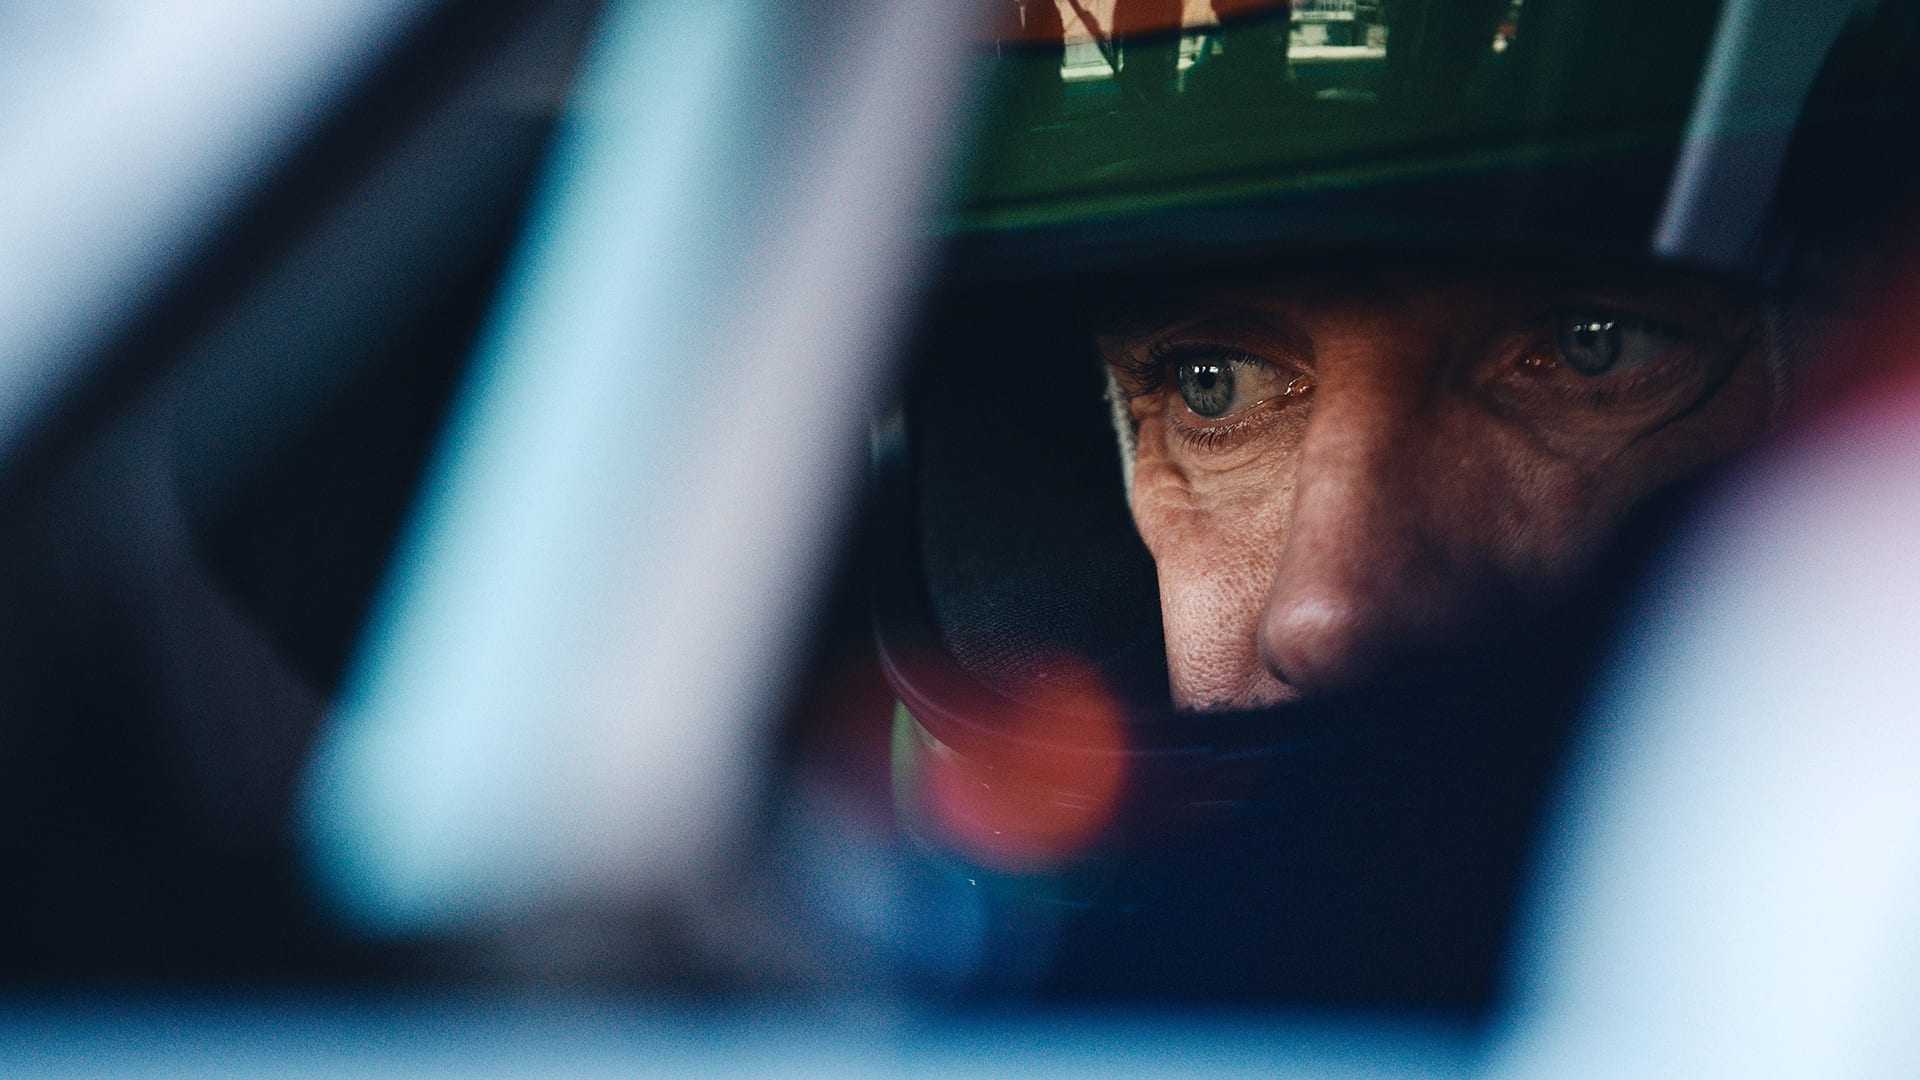 Michael Fassbender: Road to Le Mans – The Final Race